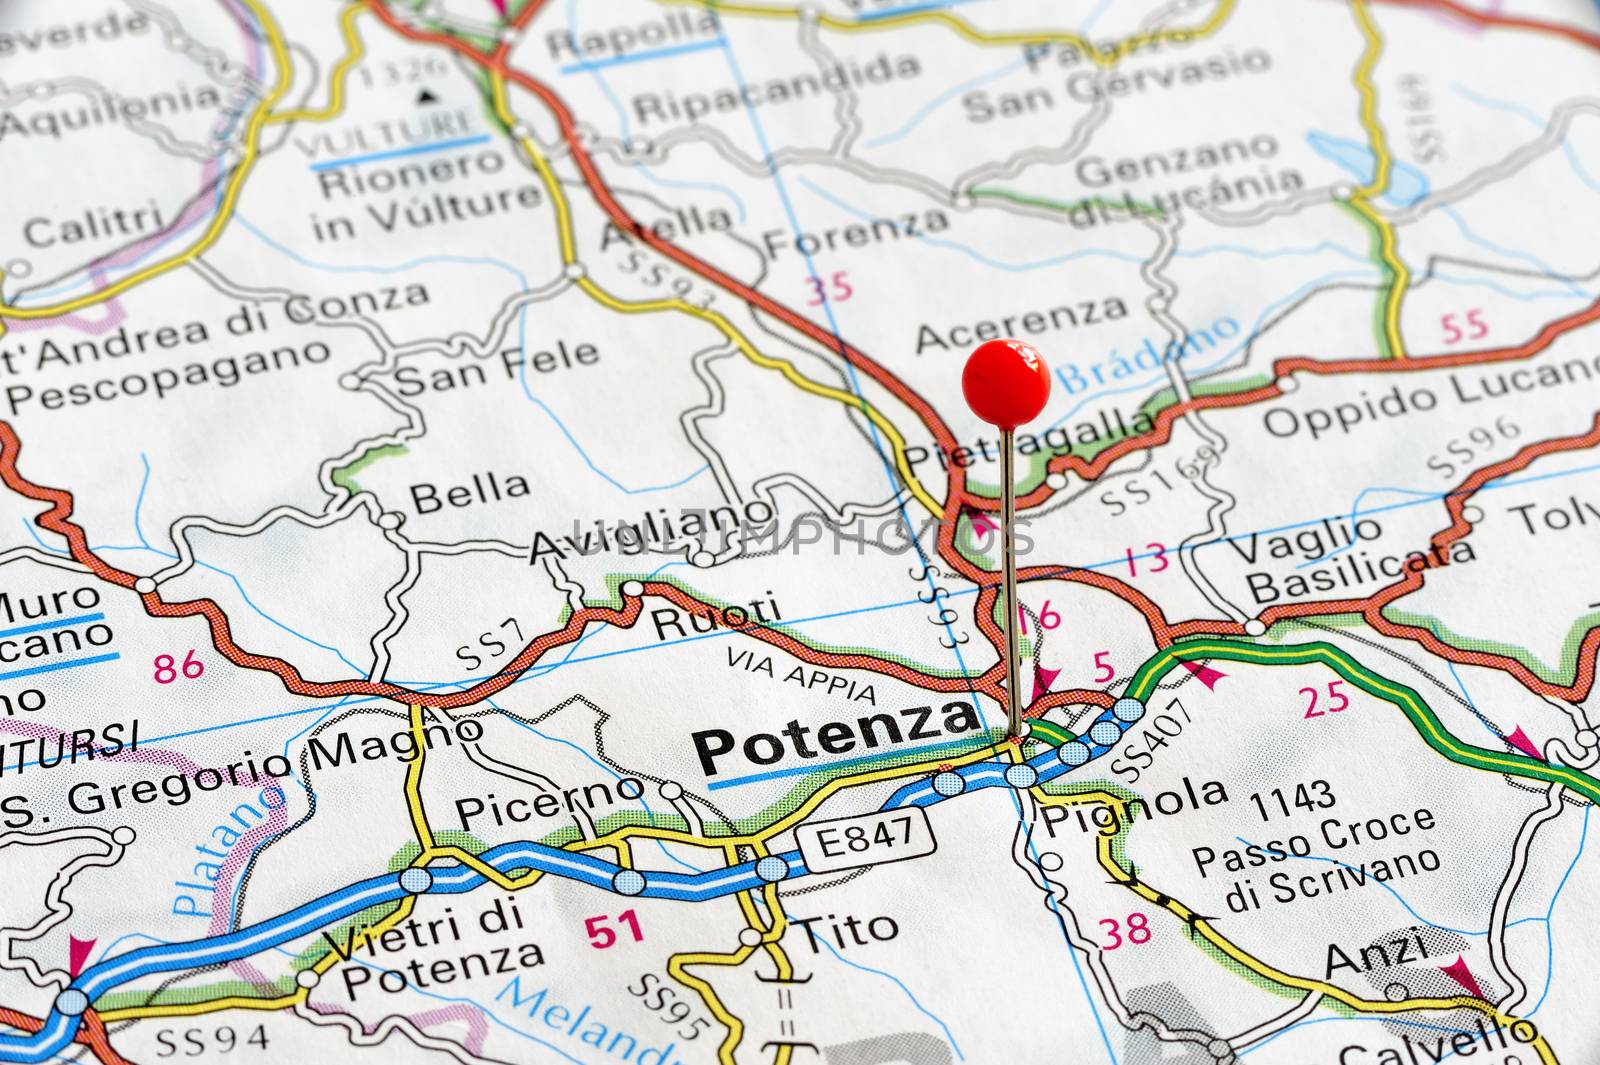 Europe cities on map series: Potenza